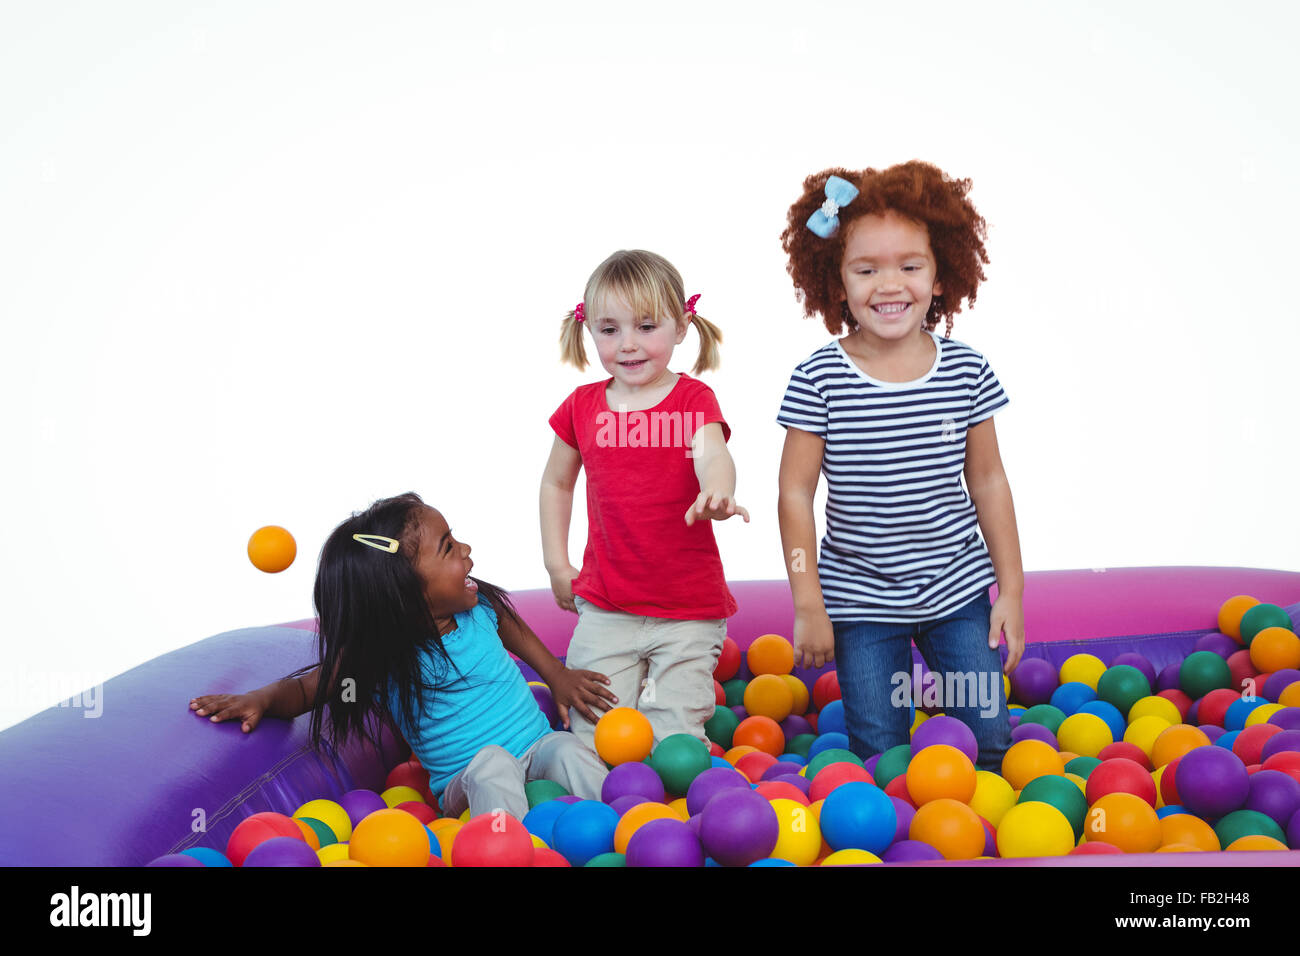 Cute smiling in sponge ball pool Banque D'Images